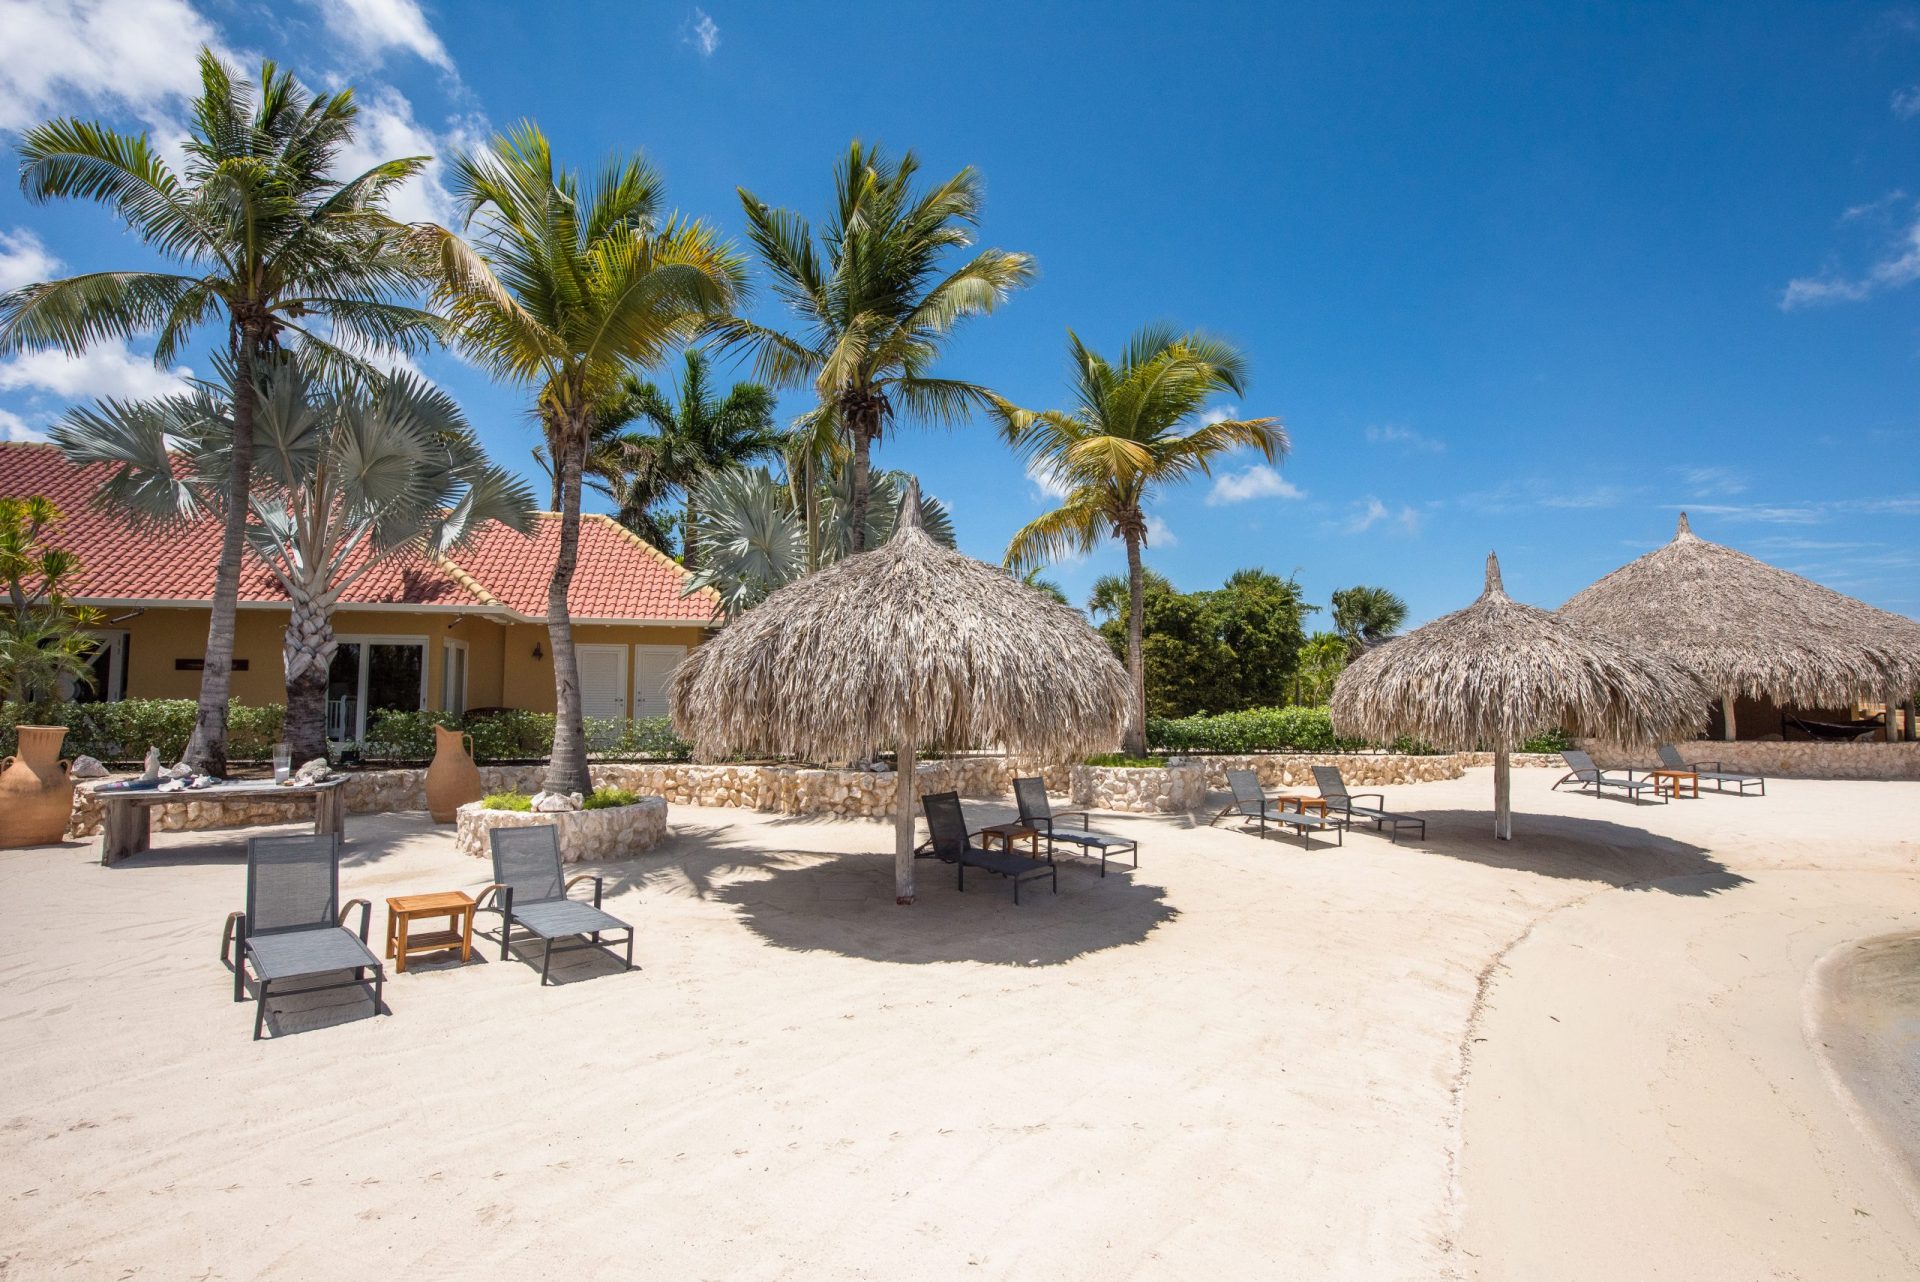 The beach with palapa's, palm trees and beach beds at Isla Kiniw